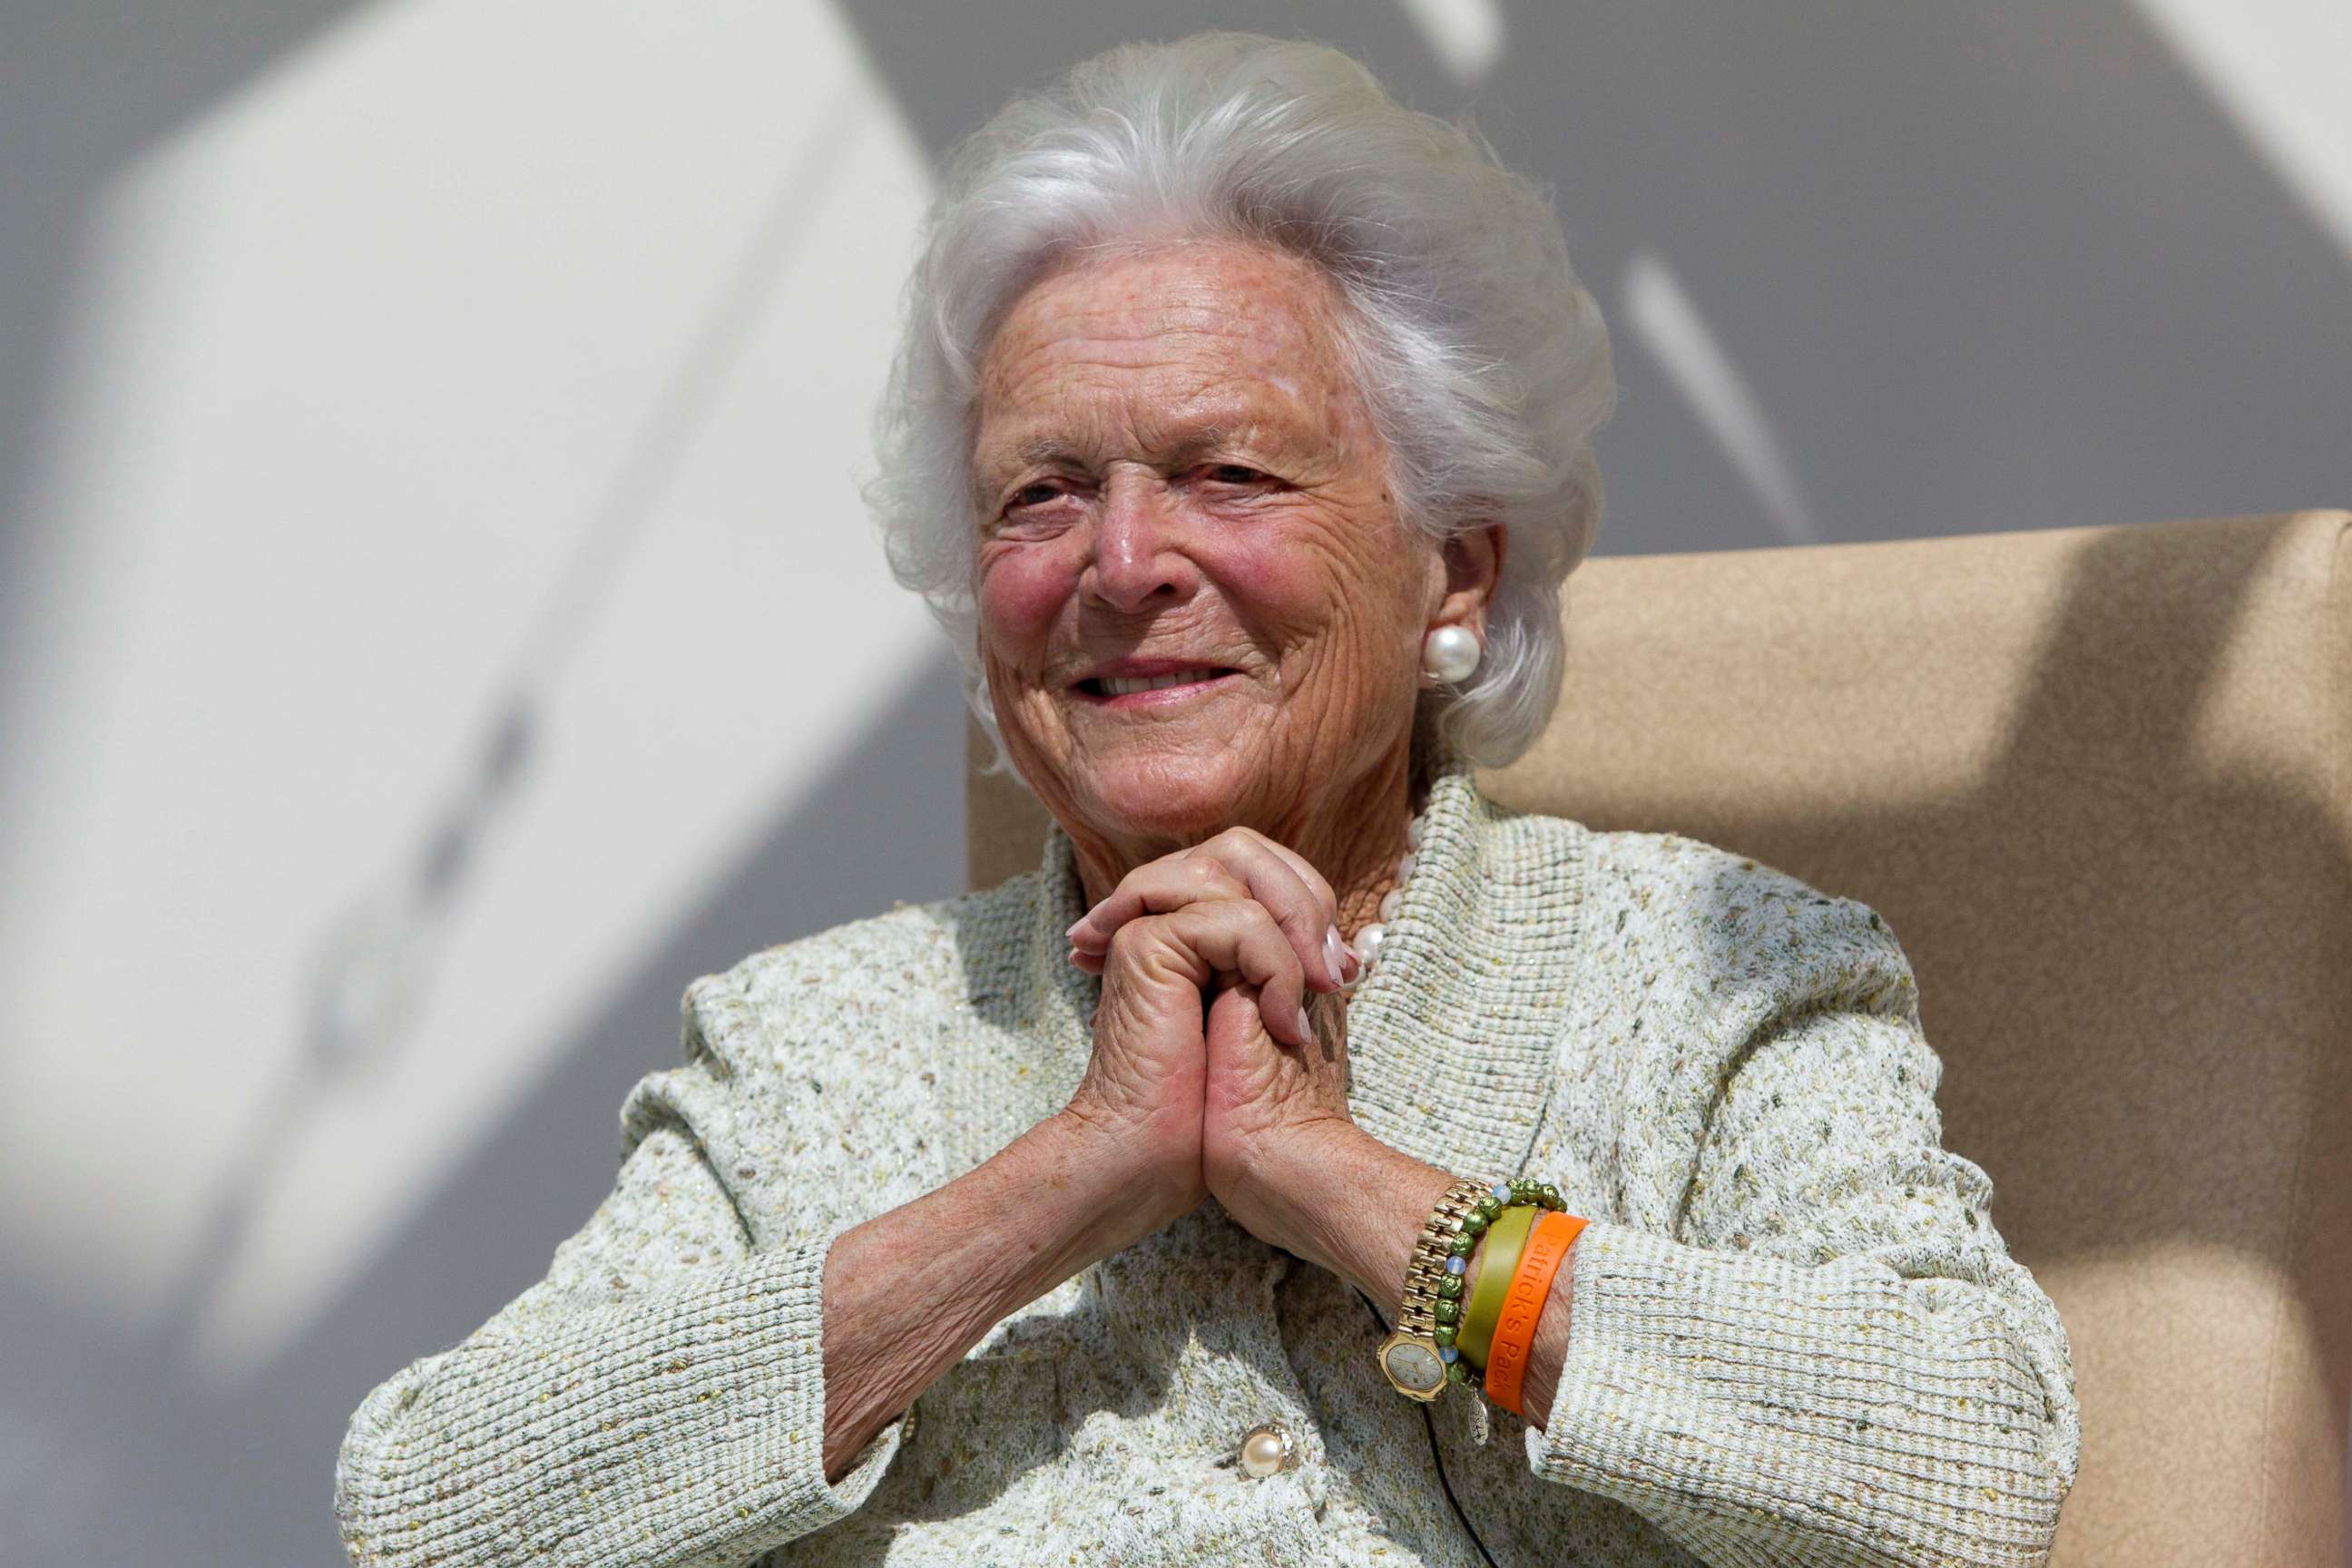 PHOTO: In a Thursday, Aug. 22, 2013, file photo, former first lady Barbara Bush listens to a patient's question during a visit to the Barbara Bush Children's Hospital at Maine Medical Center in Portland, Maine.